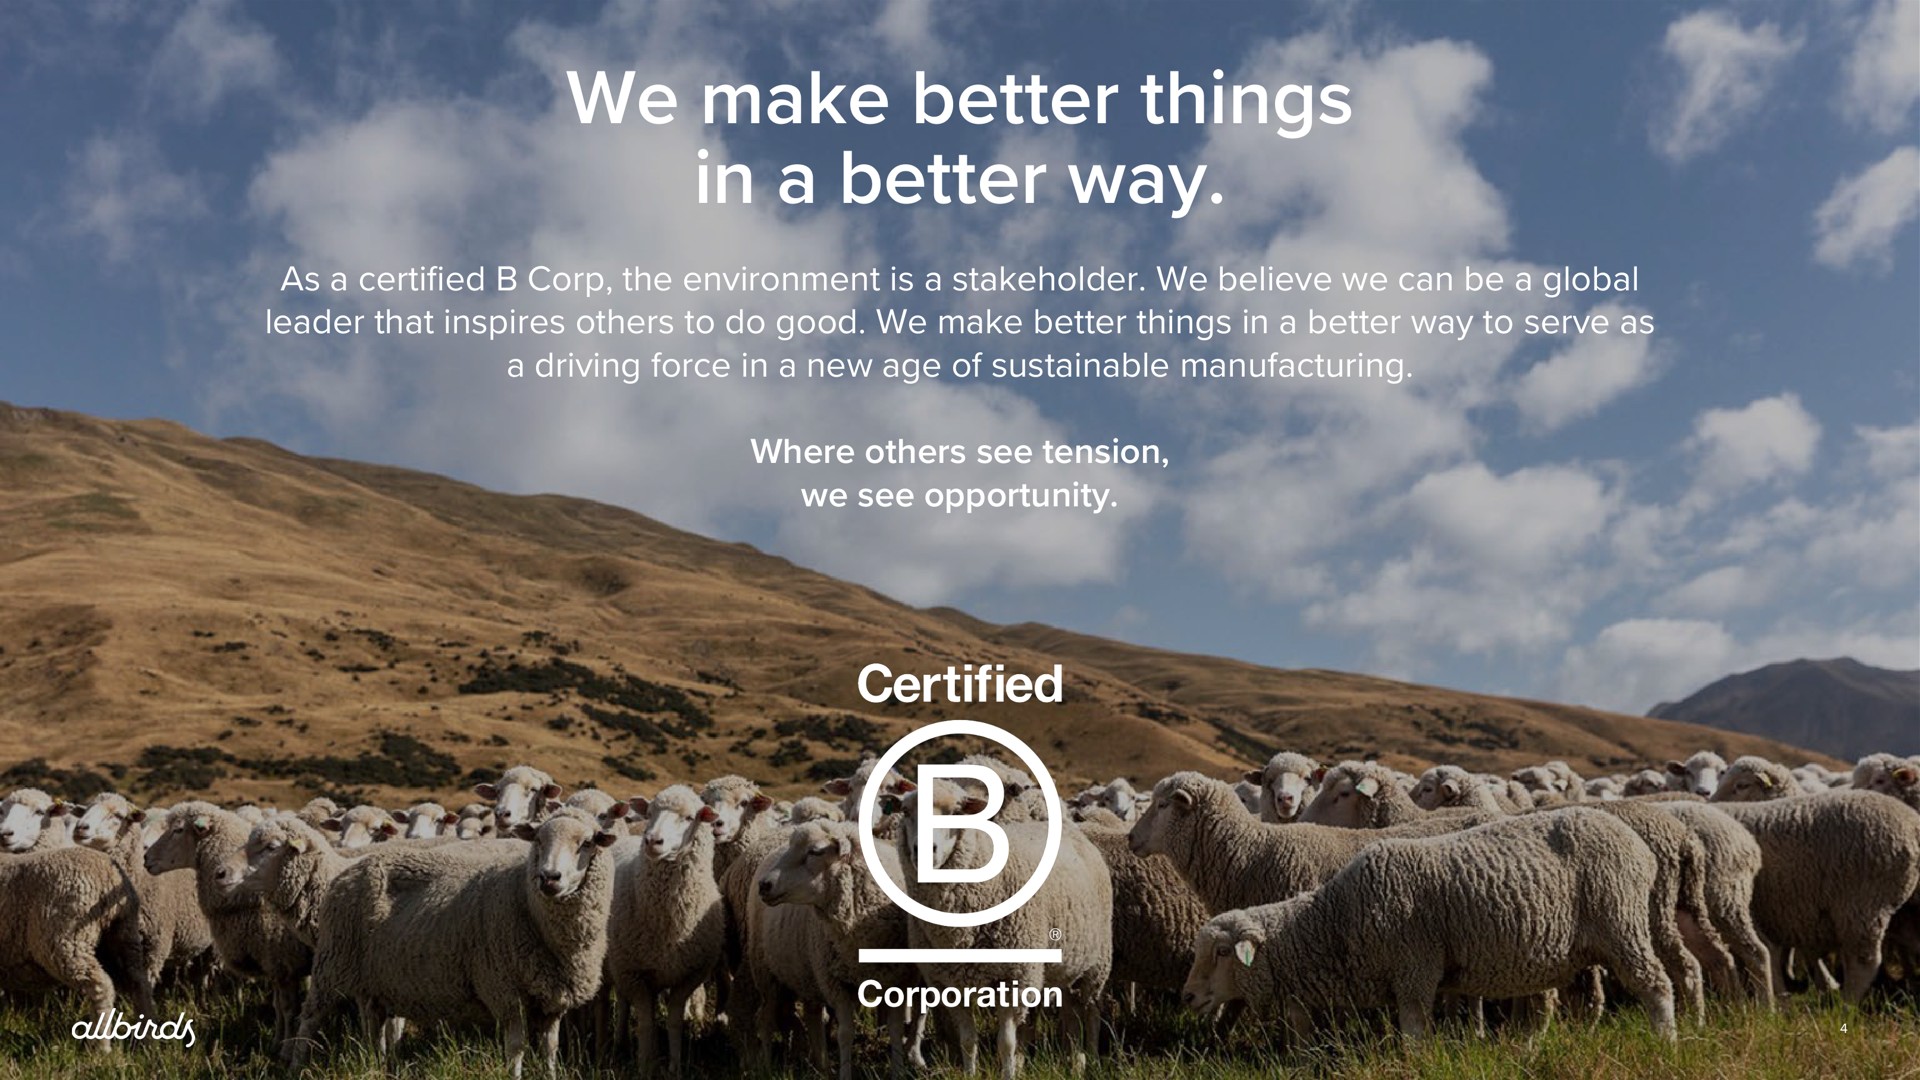 we make better things in a better way as a certified corp the environment is a stakeholder we believe we can be a global leader that inspires to do good we make better things in a better way to serve as a driving force in a new age of sustainable manufacturing where see tension we see opportunity i | Allbirds